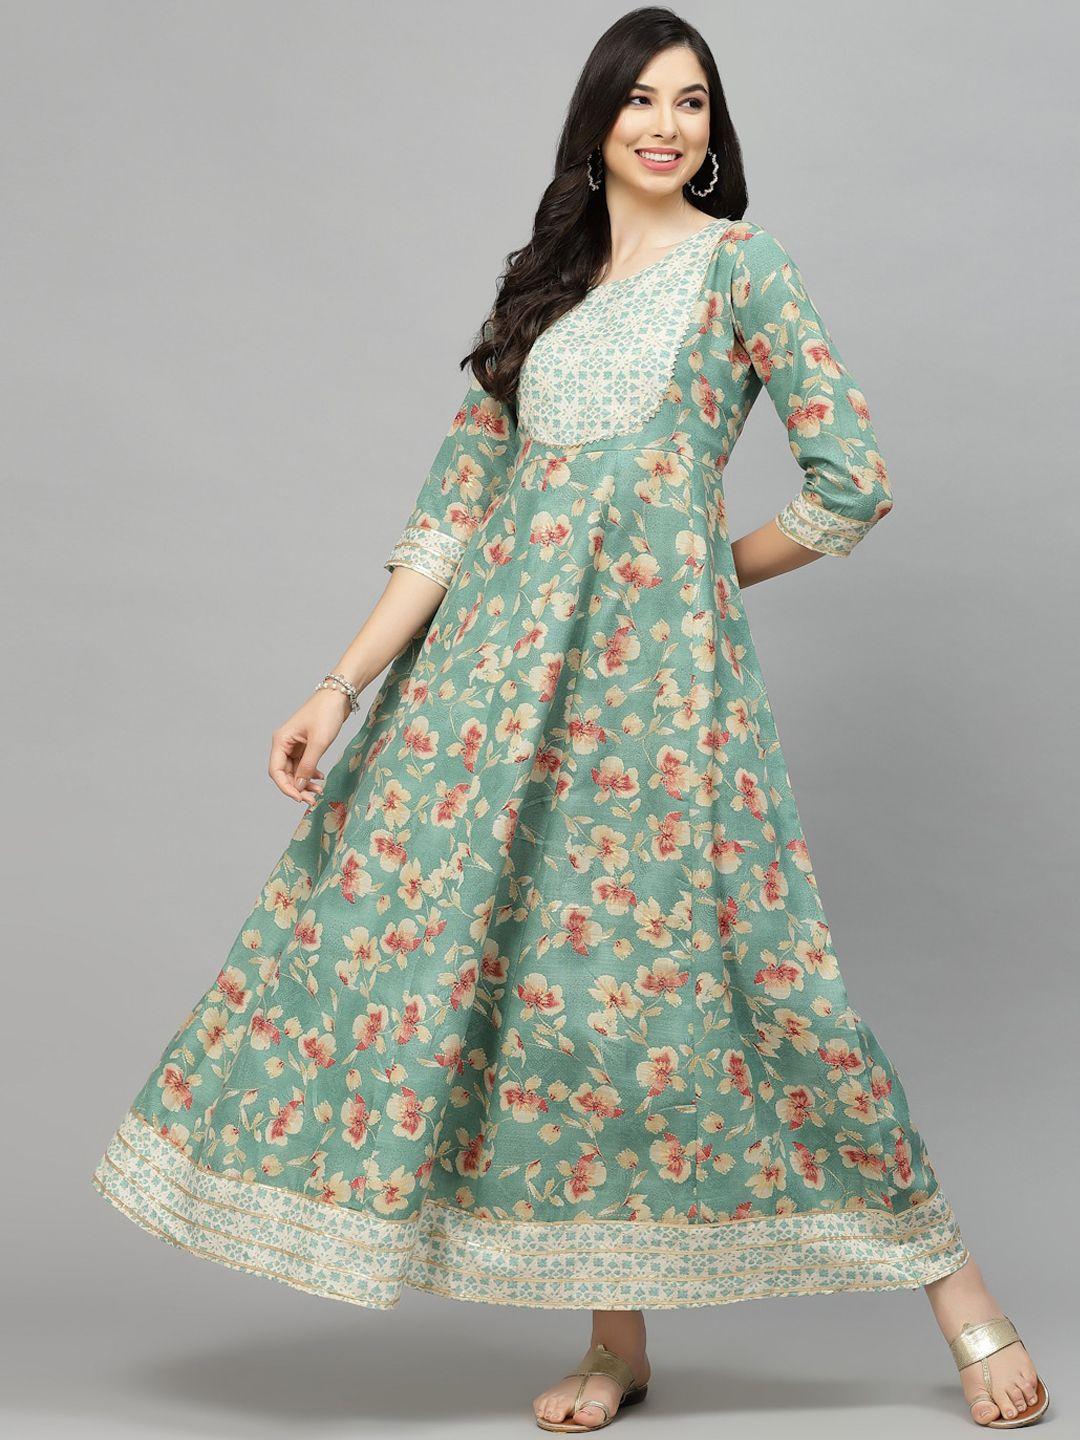 stylum green floral printed round neck gathered a-line maxi ethnic dress